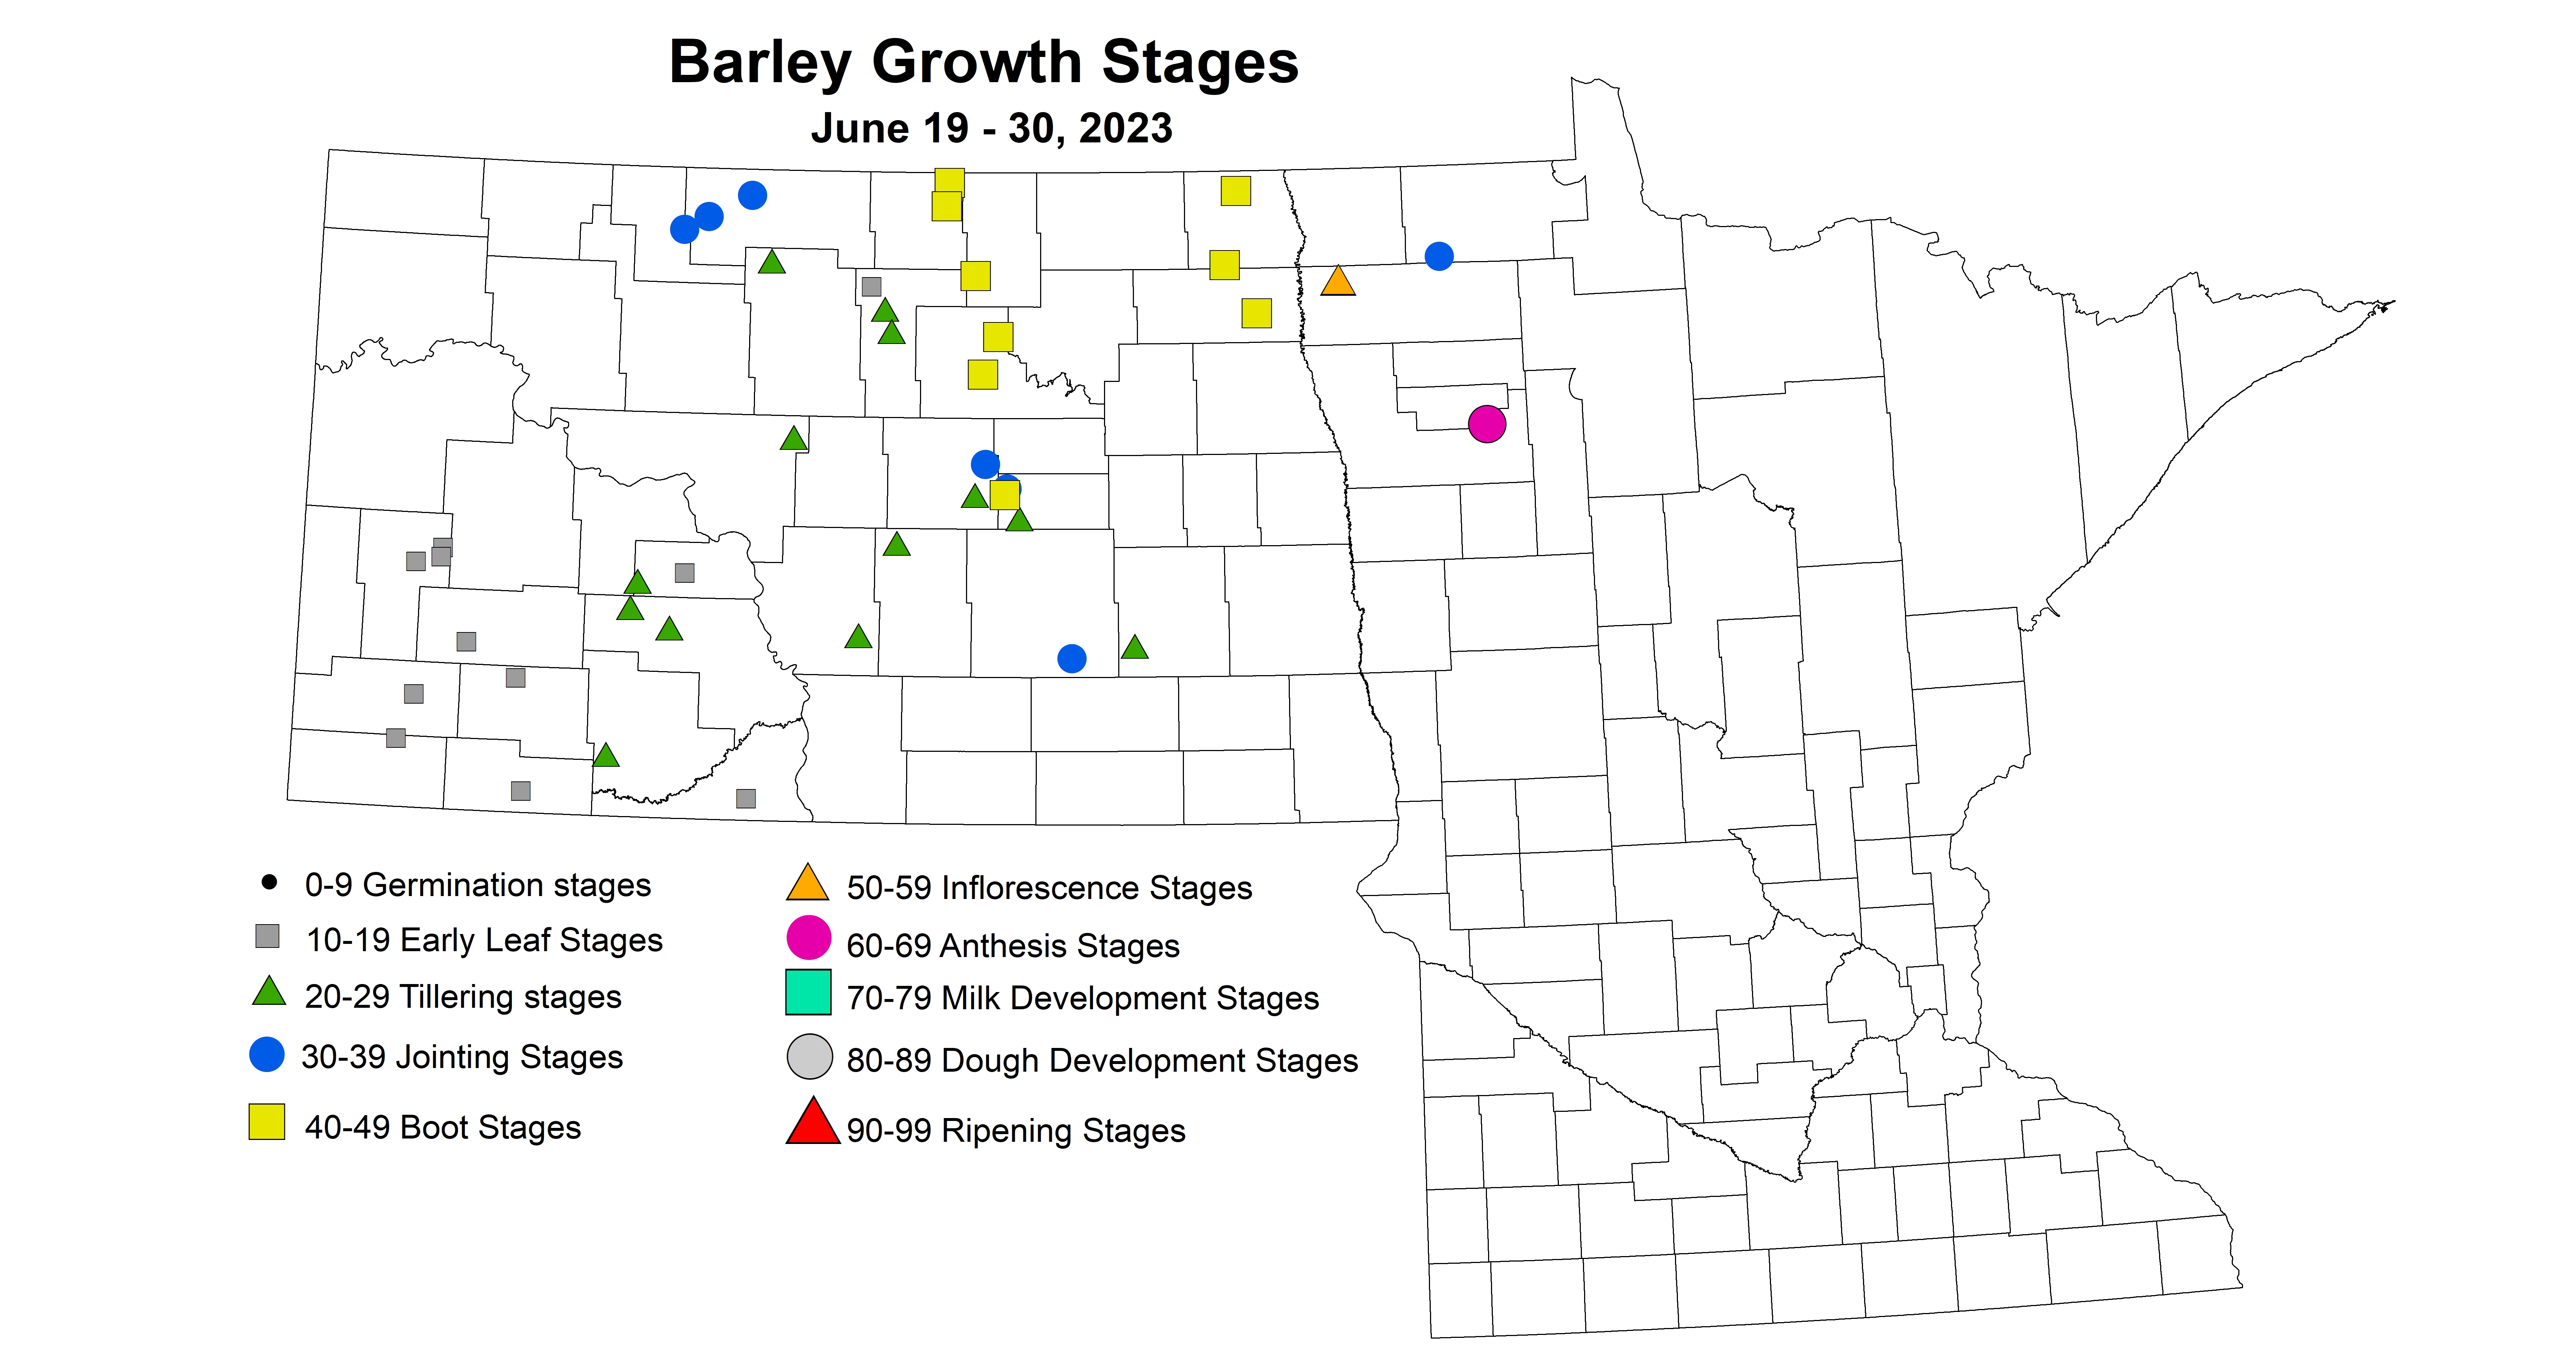 barley growth stages June 19-30 2023